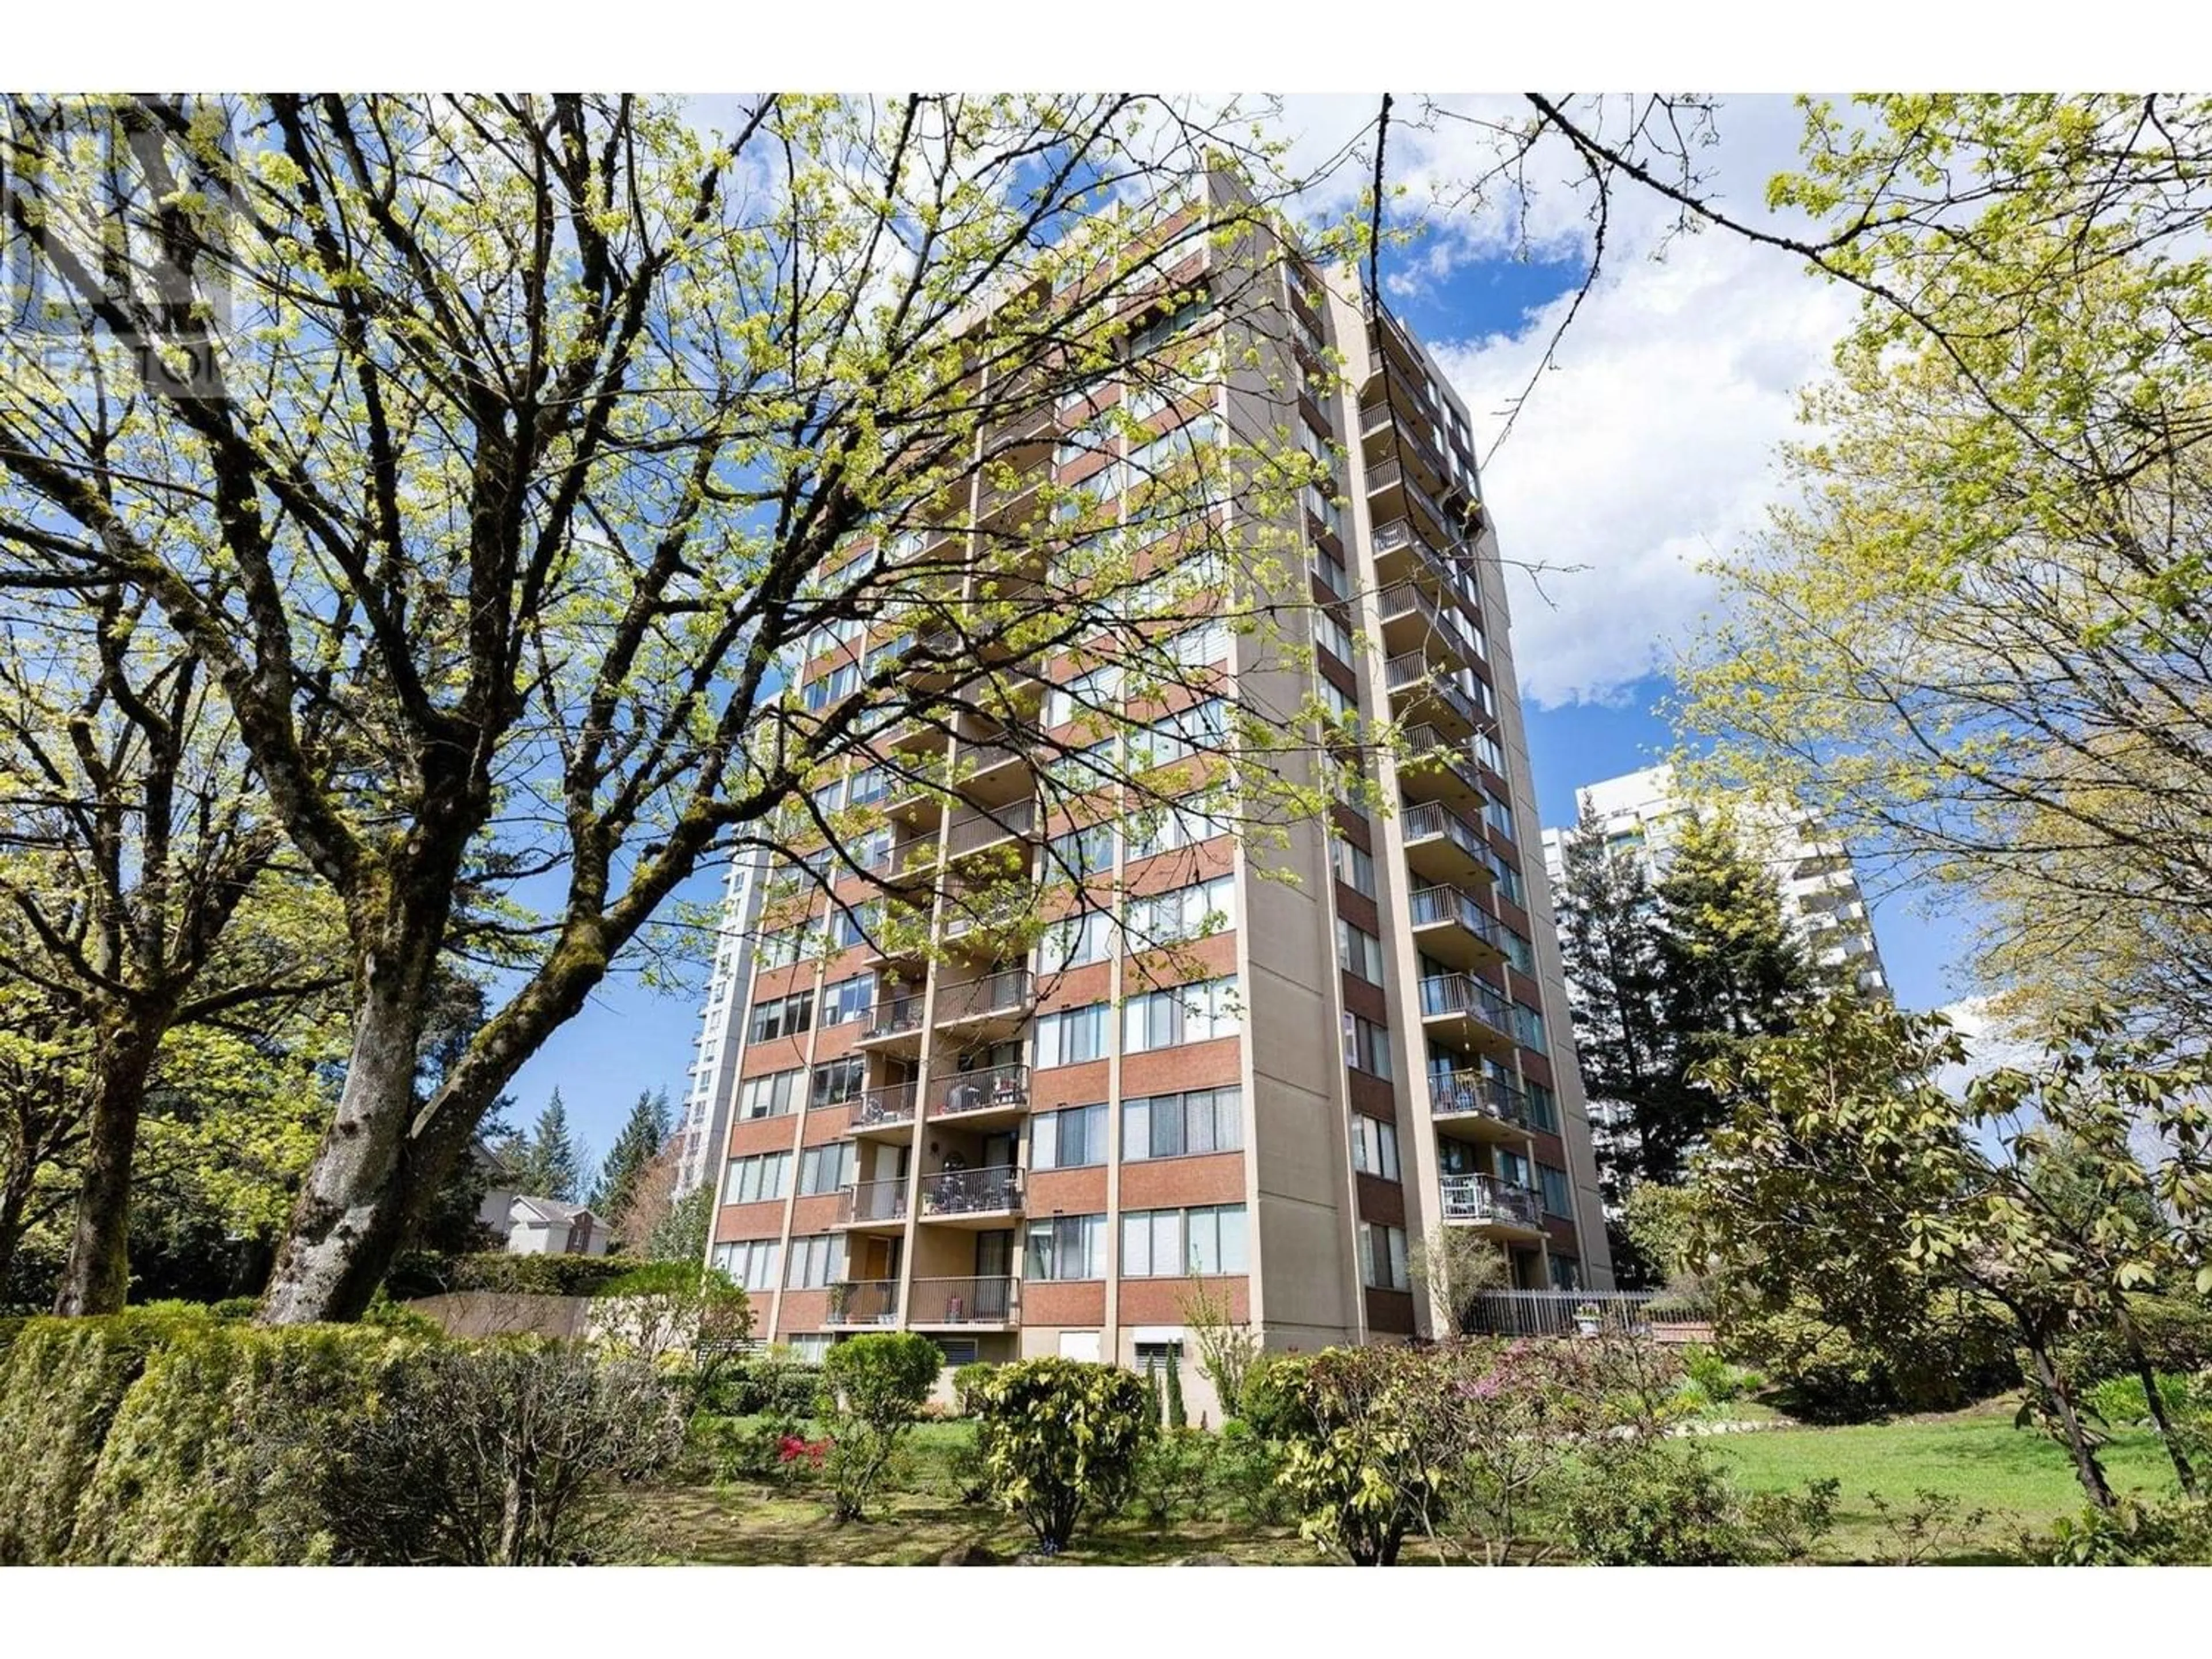 A pic from exterior of the house or condo for 1206 7275 SALISBURY AVENUE, Burnaby British Columbia V5E4E1